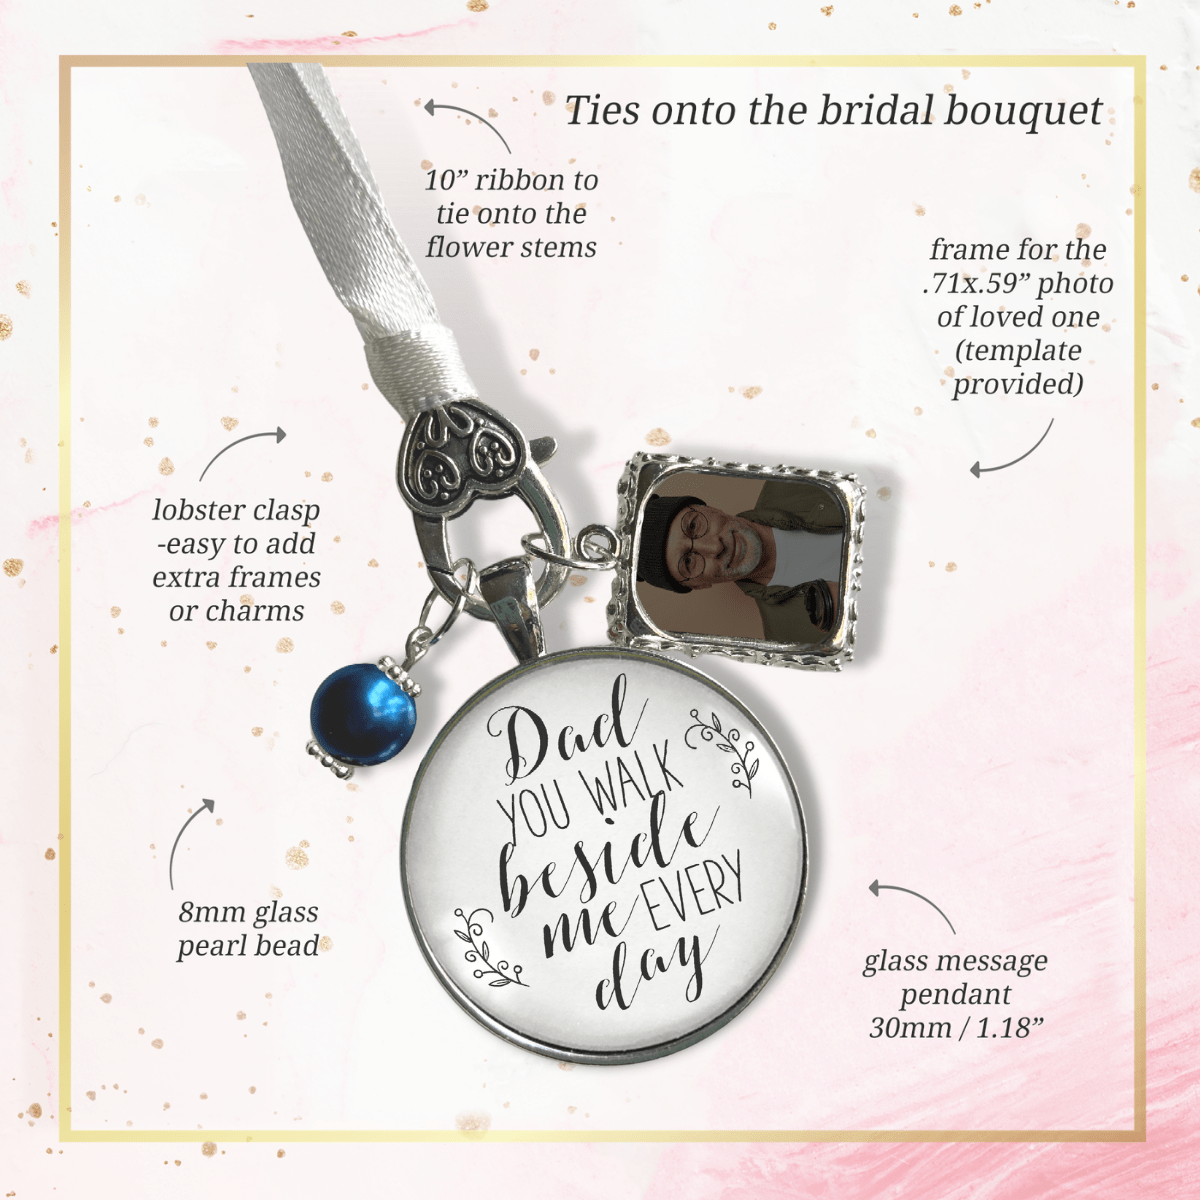 Wedding Bouquet Charm Dad You Walk Beside Me White Bride Father Photo Silver Blue Bead - Gutsy Goodness;Wedding Bouquet Charm Dad You Walk Beside Me White Bride Father Photo Silver Blue Bead - Gutsy Goodness Handmade Jewelry Gifts